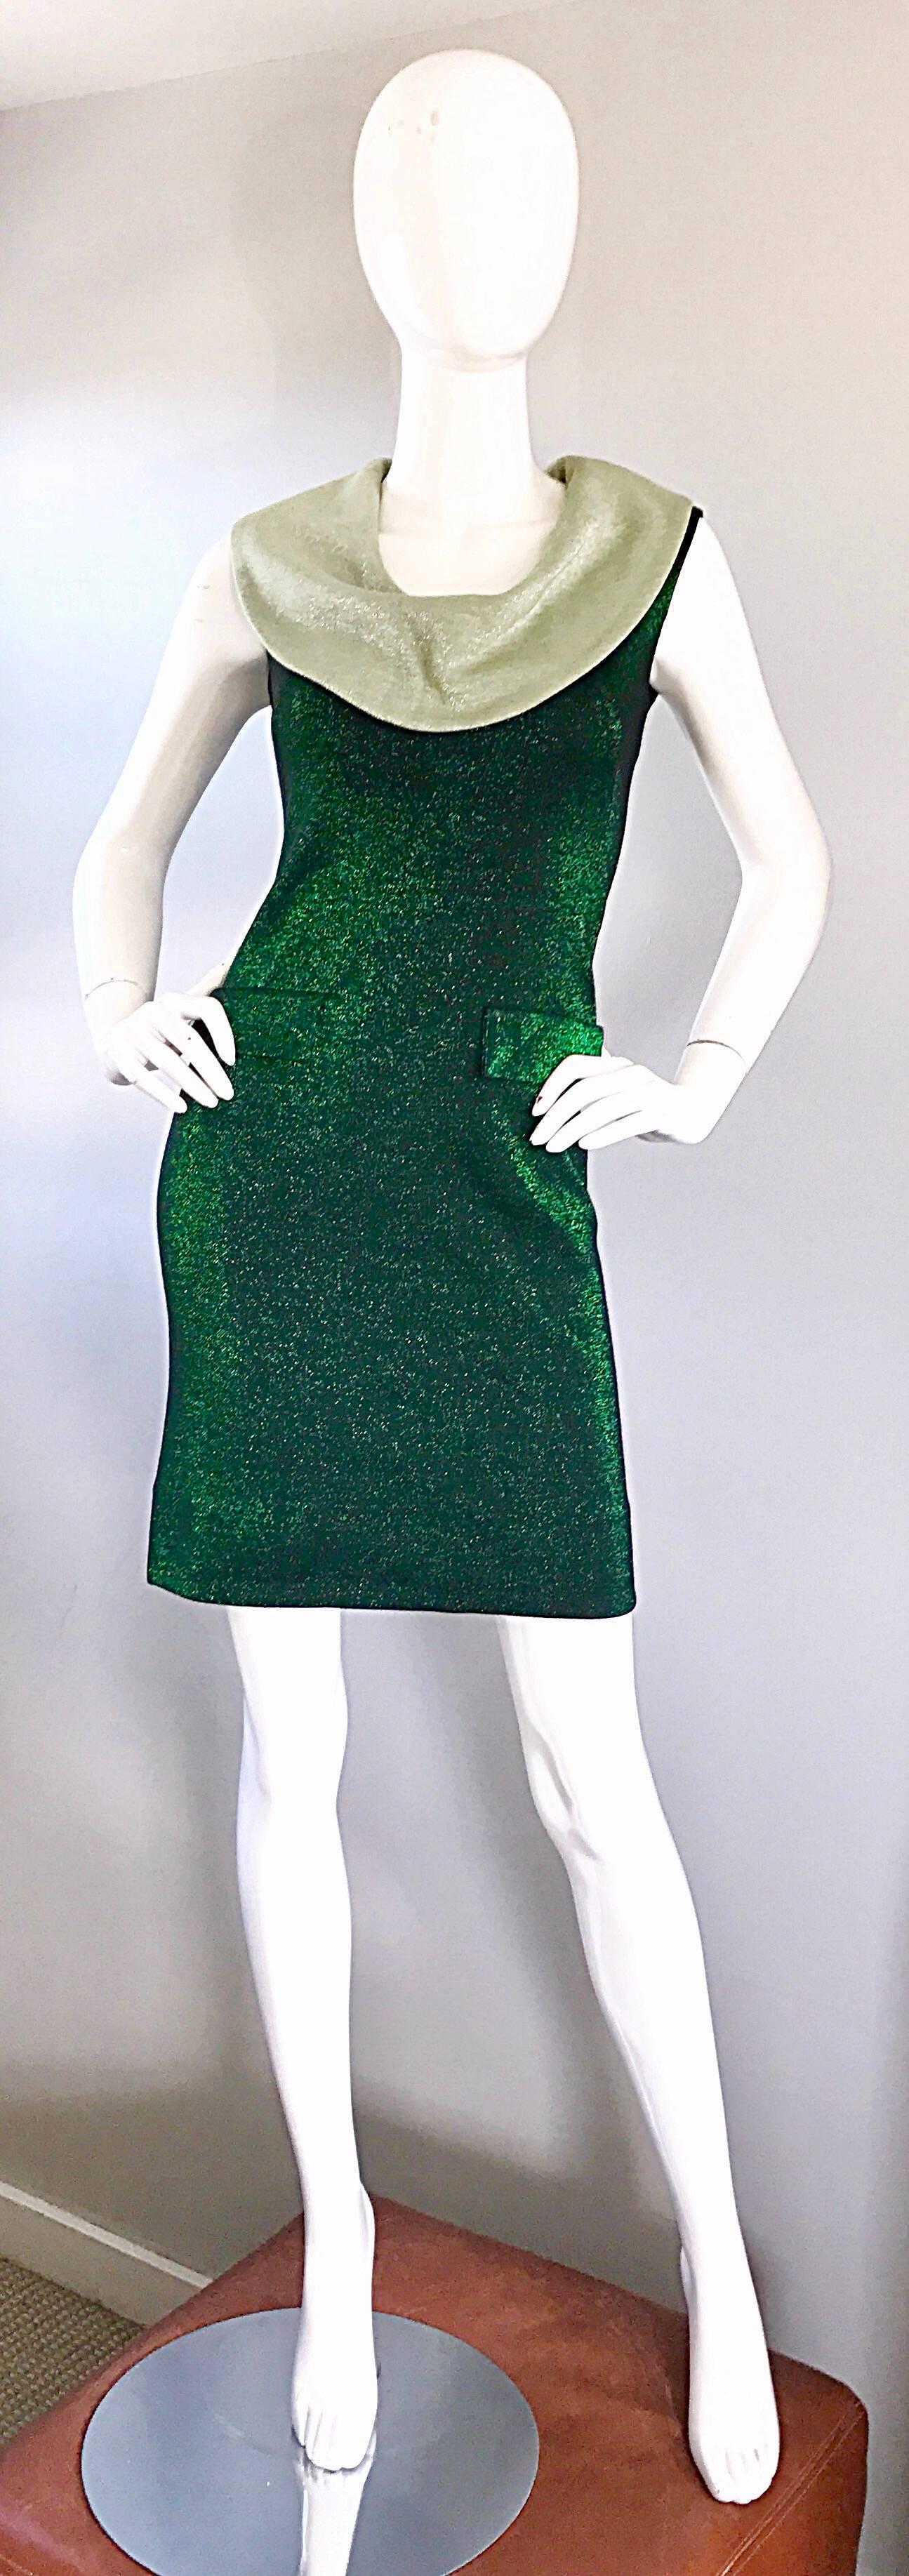 Tres Chic early 1960s forest green and light green metallic cowl neck shift dress! Beautiful vibrant green goes great with practically any skin tone! Oversize exaggerated collar, and two mock pockets at front waist. Soft jersey material stretches to